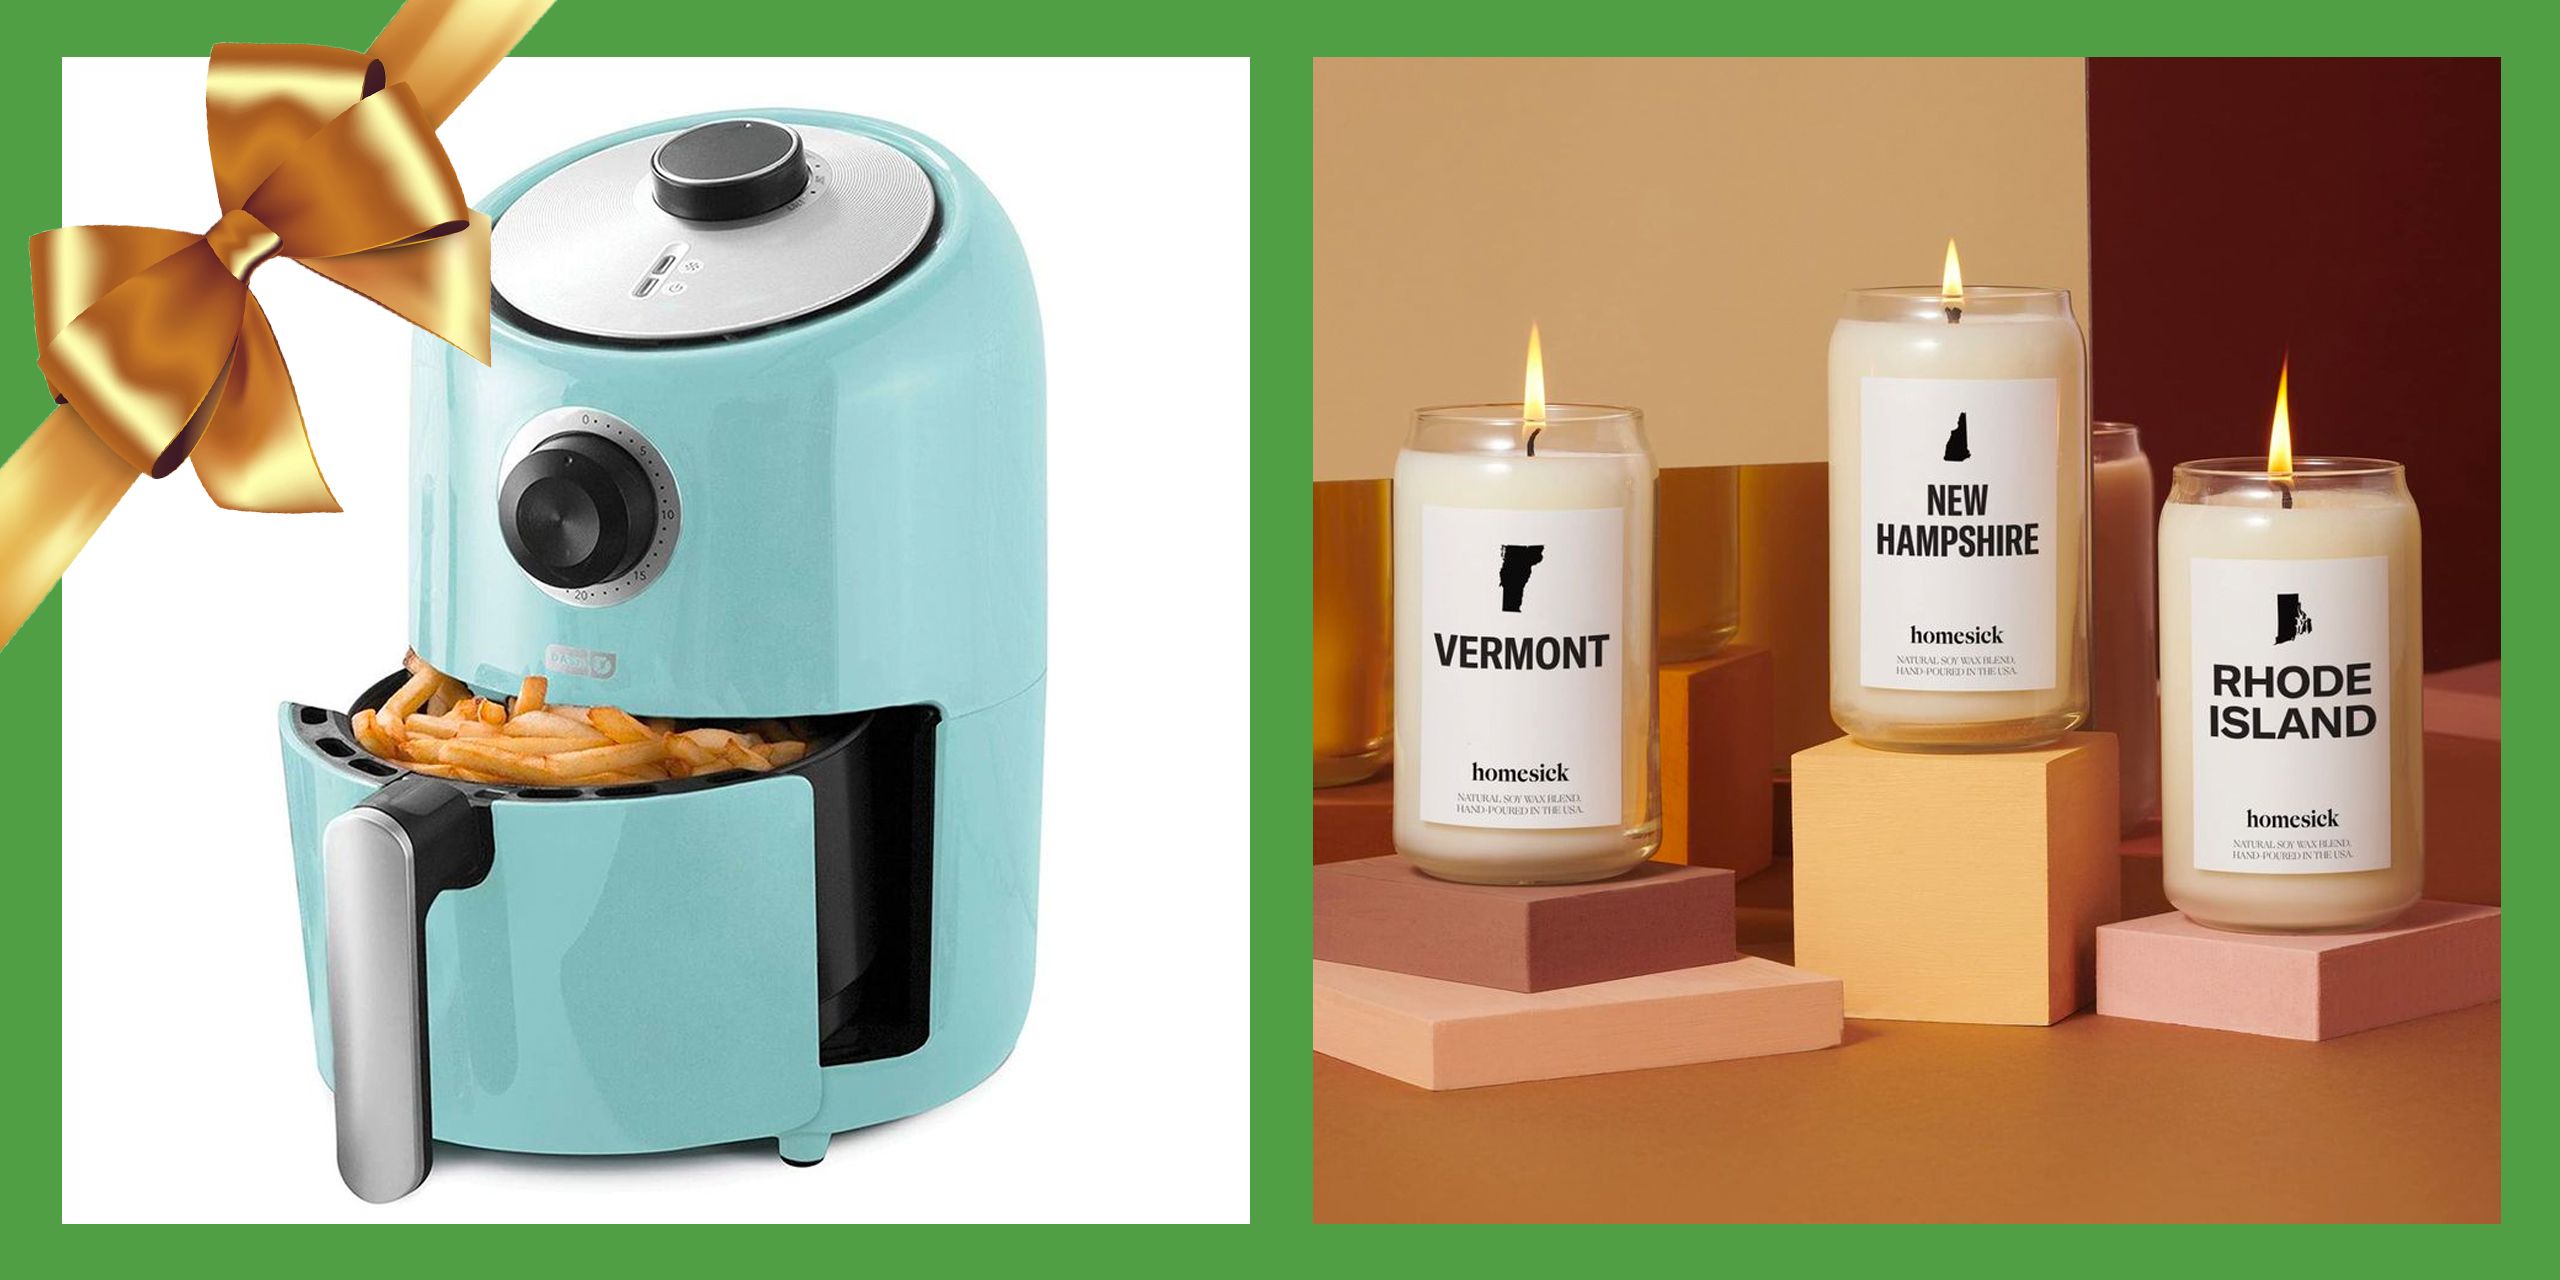 38 Best Gifts Under $50 to Buy in 2023: Shop Affordable Gifts